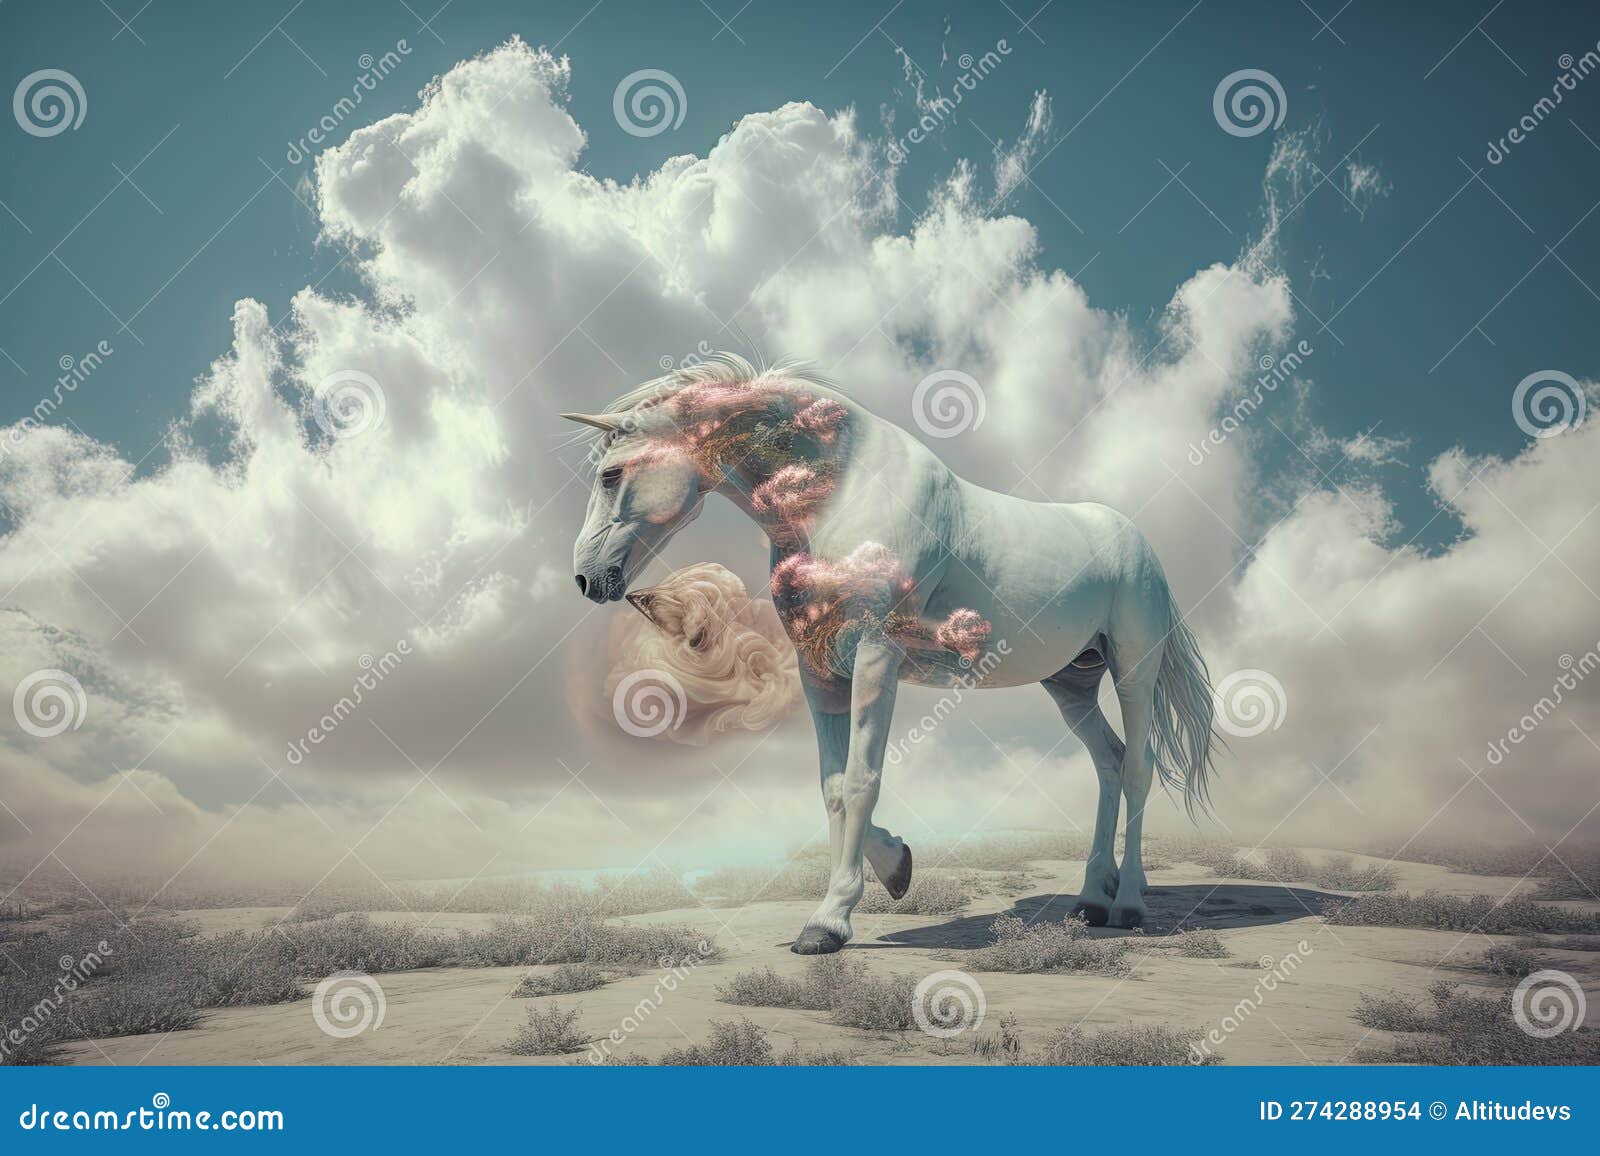 trippy unicorn, with its head in the clouds and hoofs on the ground